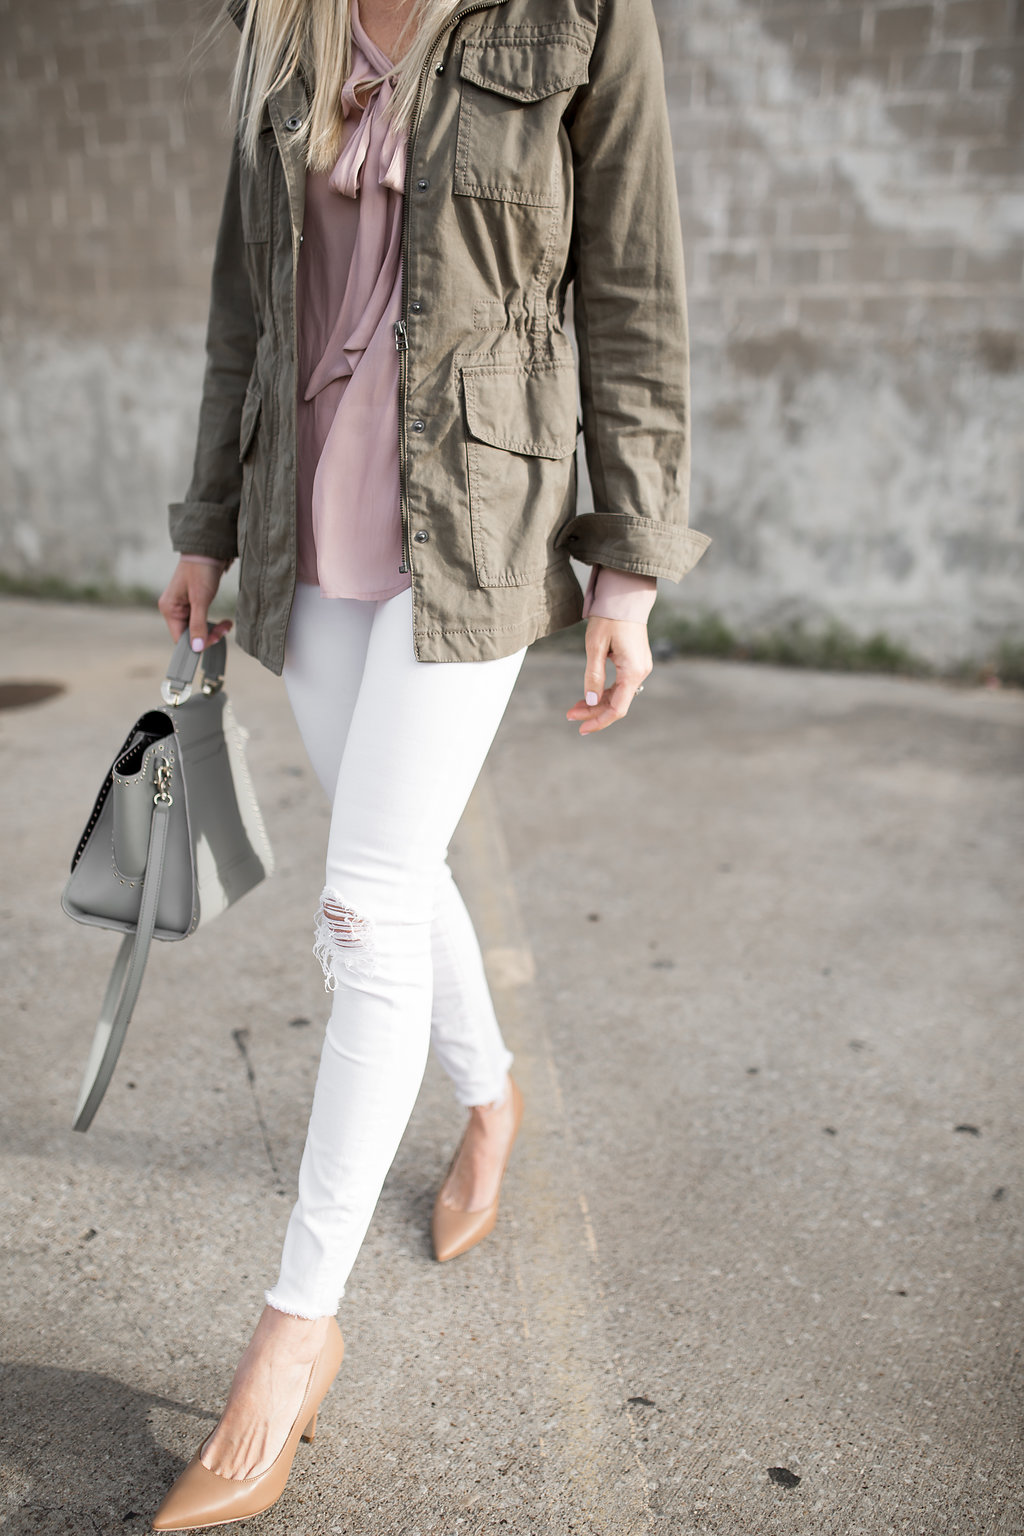 blush bow tie blouse worn with white denim and a military jacket